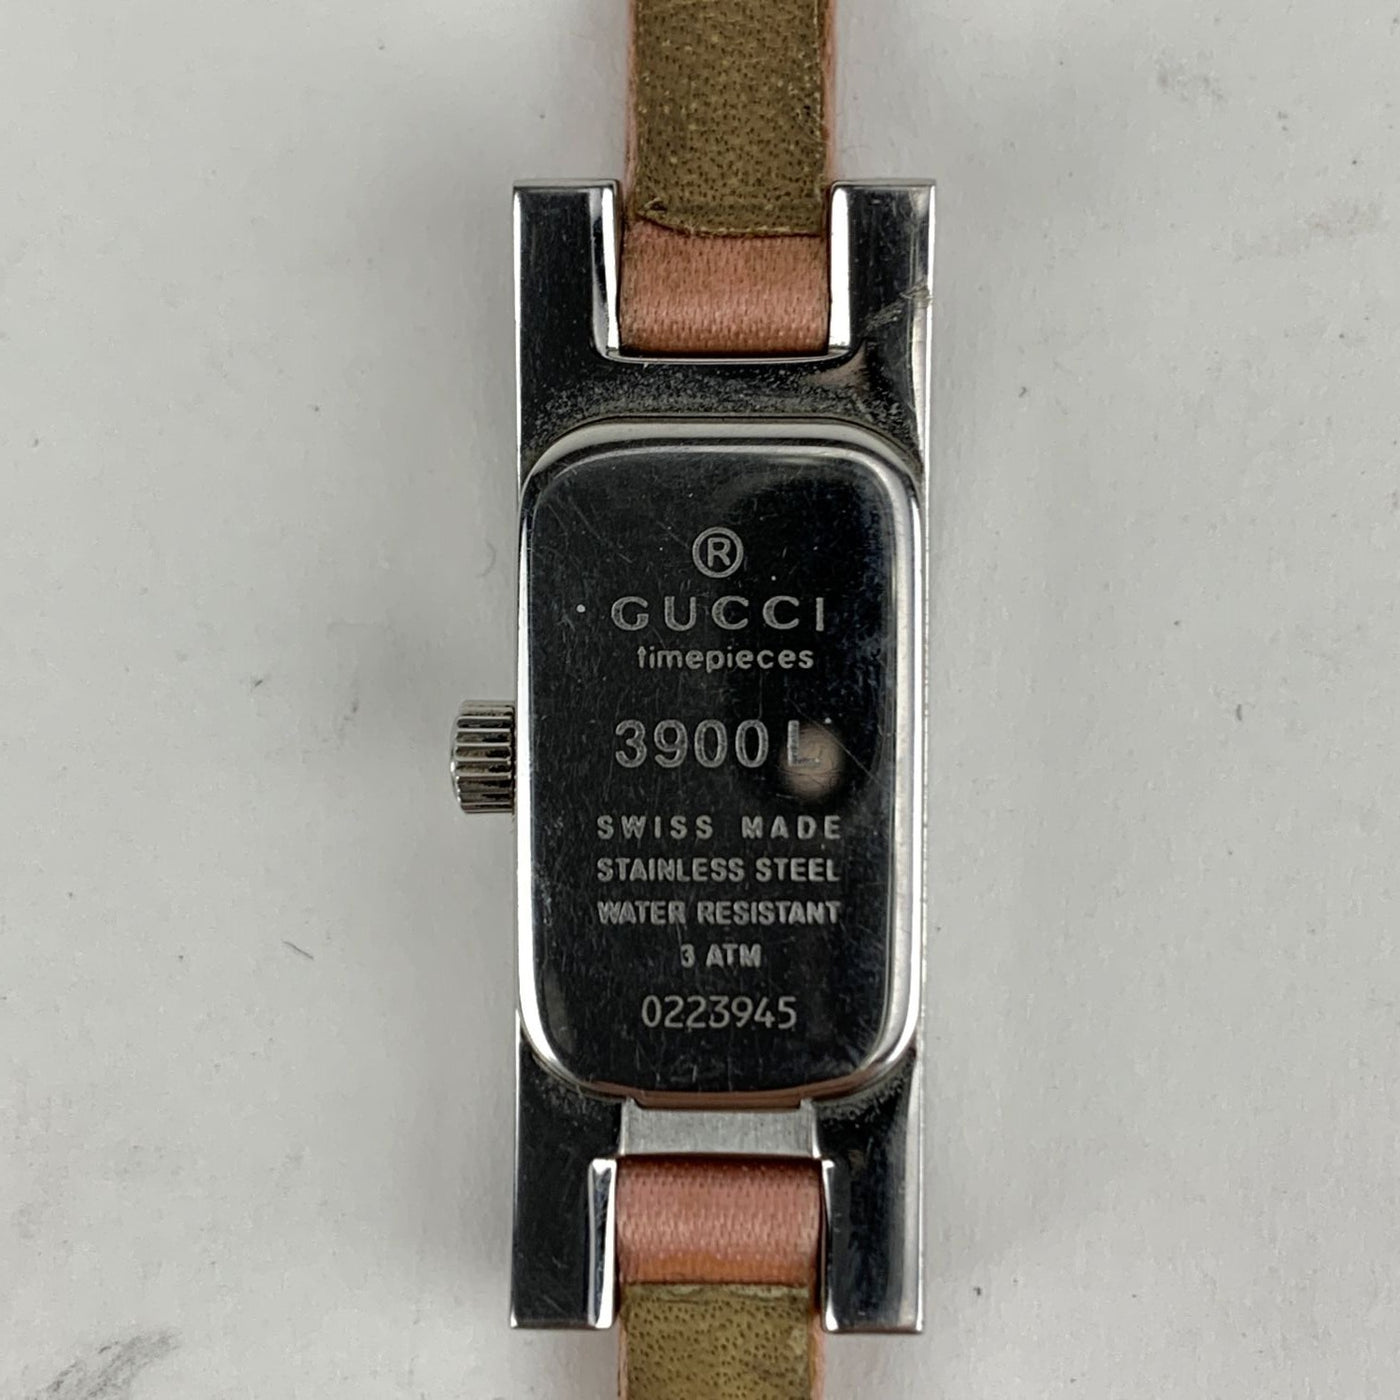 gucci watch serial number verification